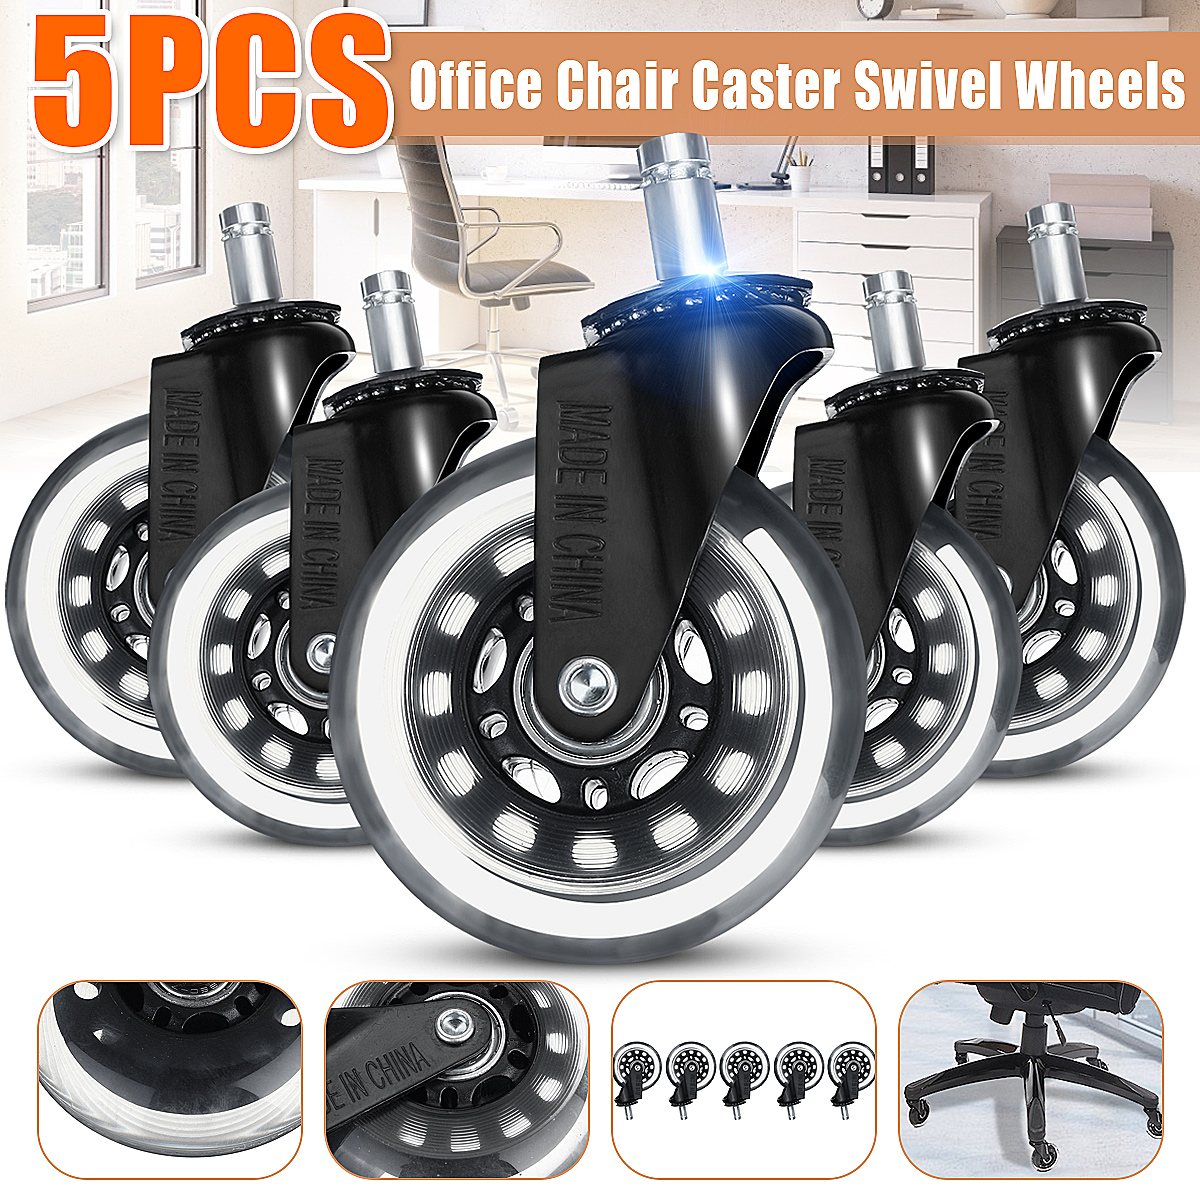 5PCS-Office-Chair-Caster-Wheels-2253-Inch-Swivel-Rubber-Caster-Wheels-Replacement-Soft-Safe-Rollers--1799221-1